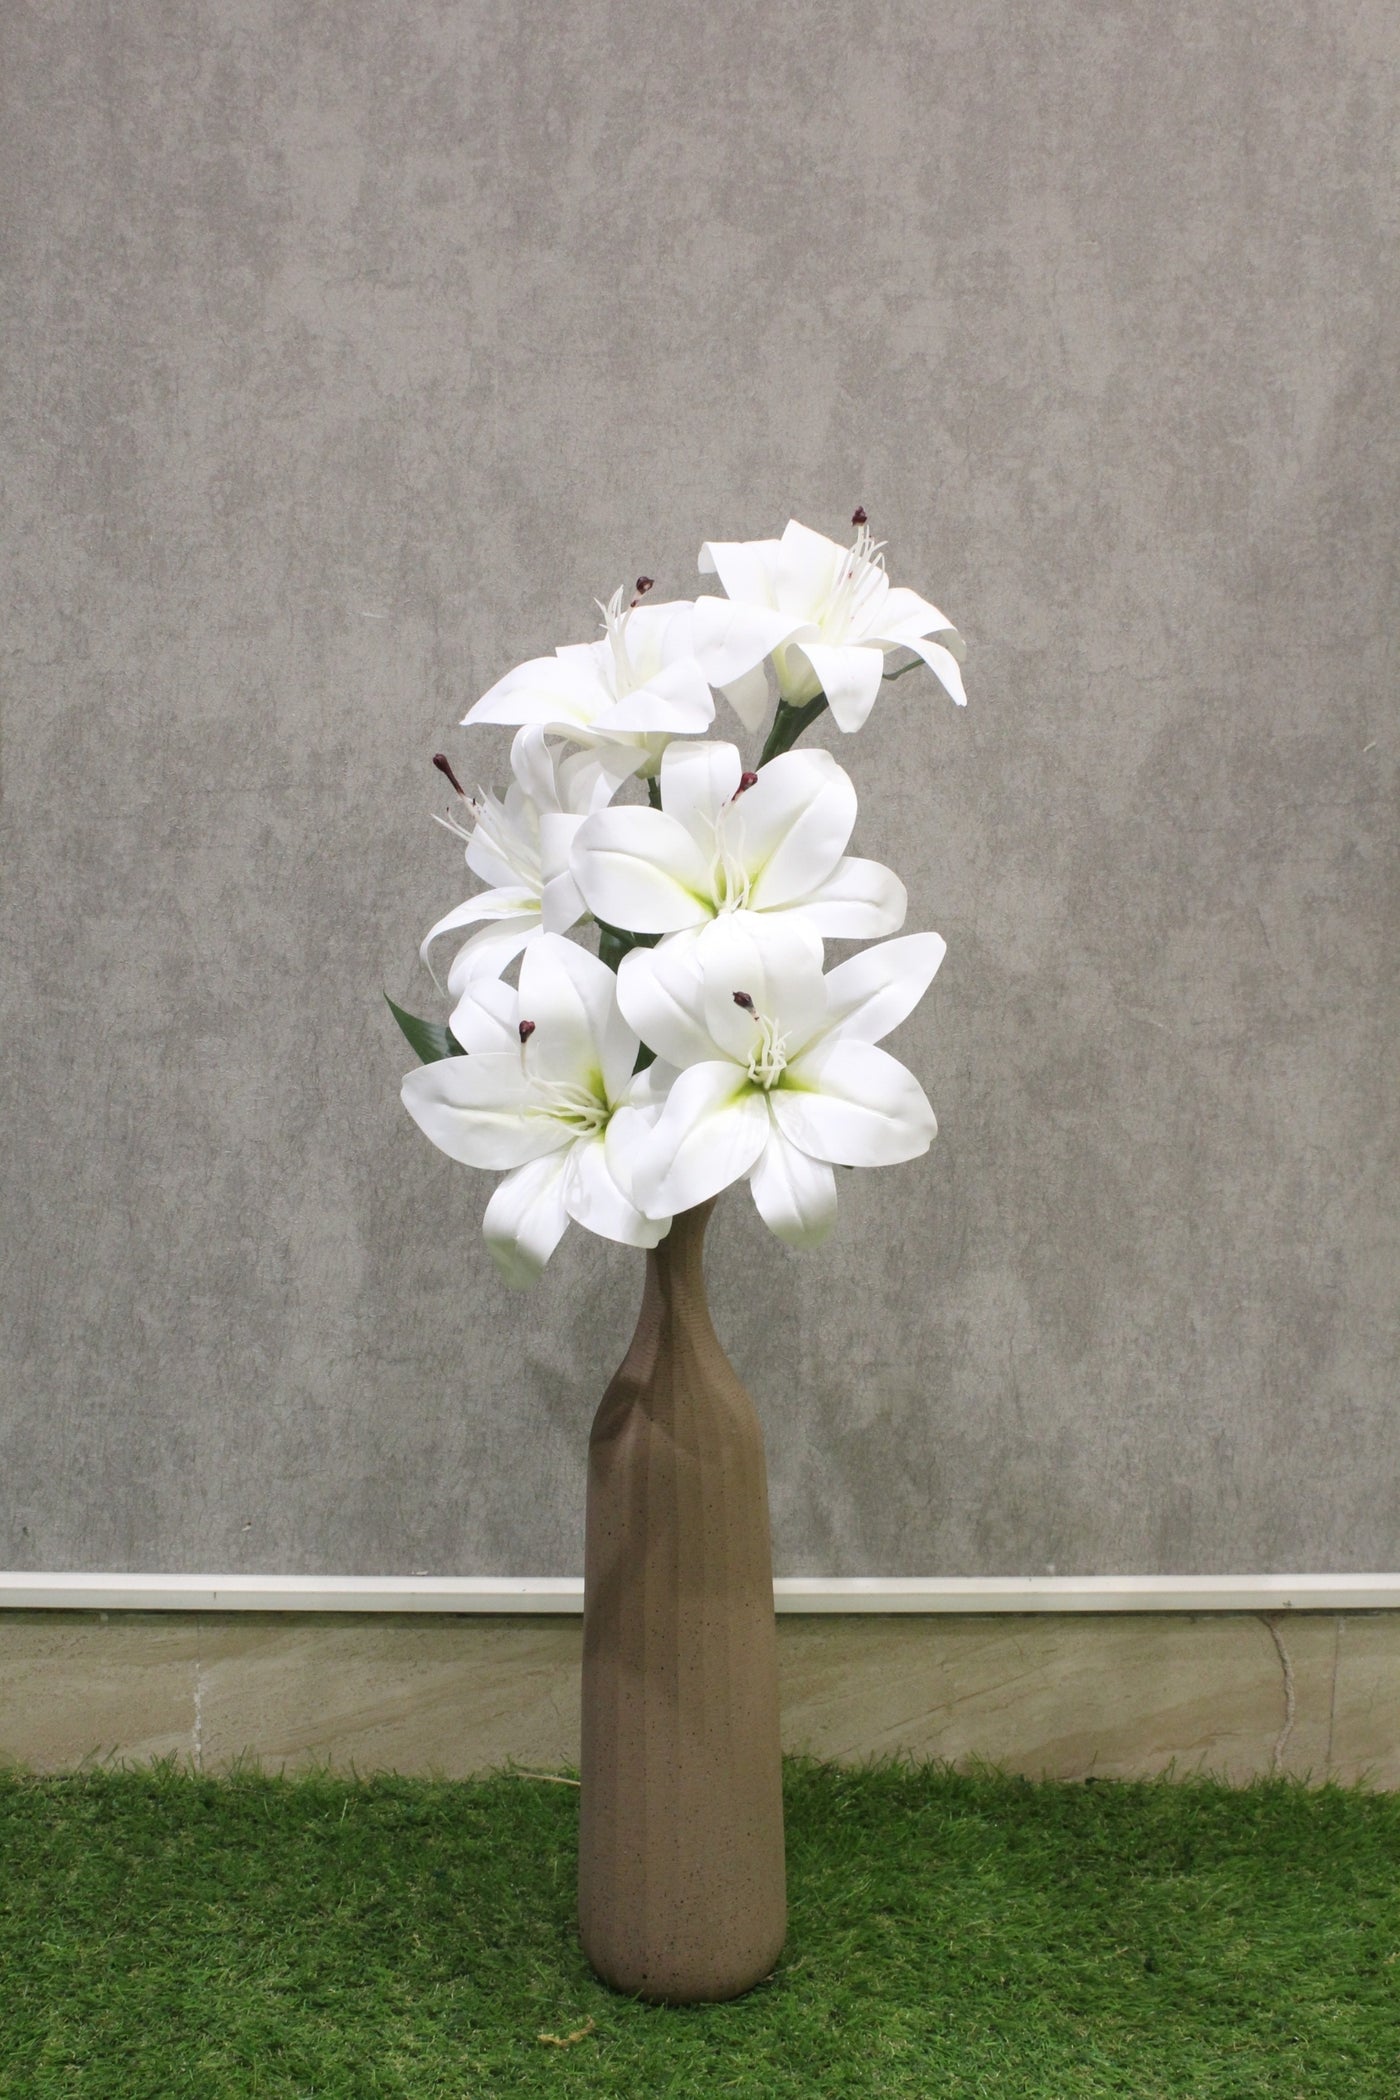 Artificial Lily Flowers for your home or office decor